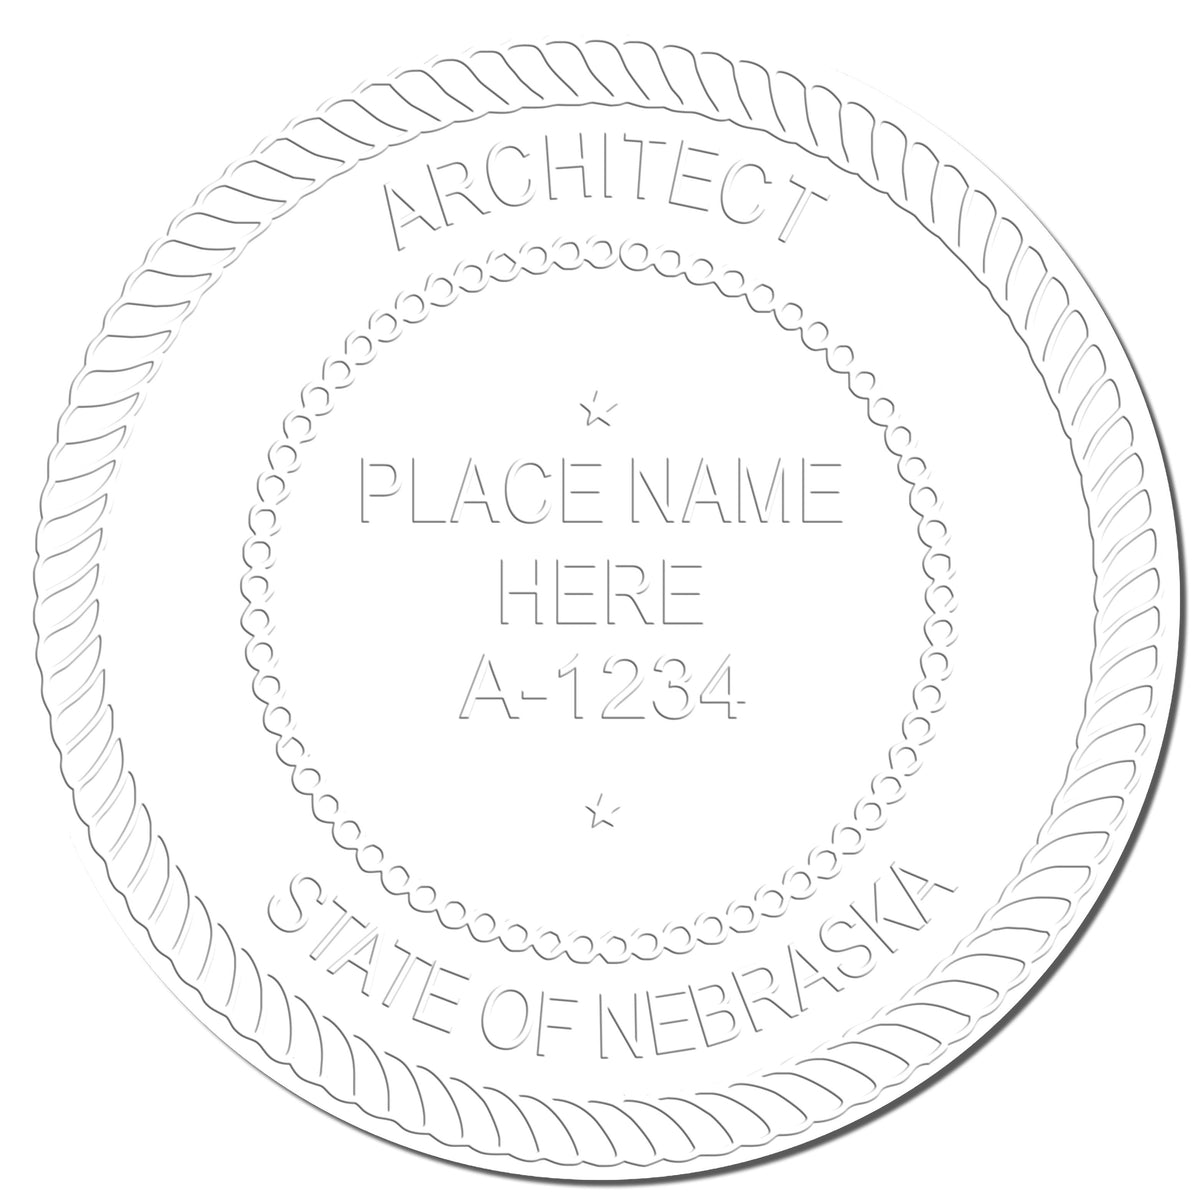 This paper is stamped with a sample imprint of the Hybrid Nebraska Architect Seal, signifying its quality and reliability.